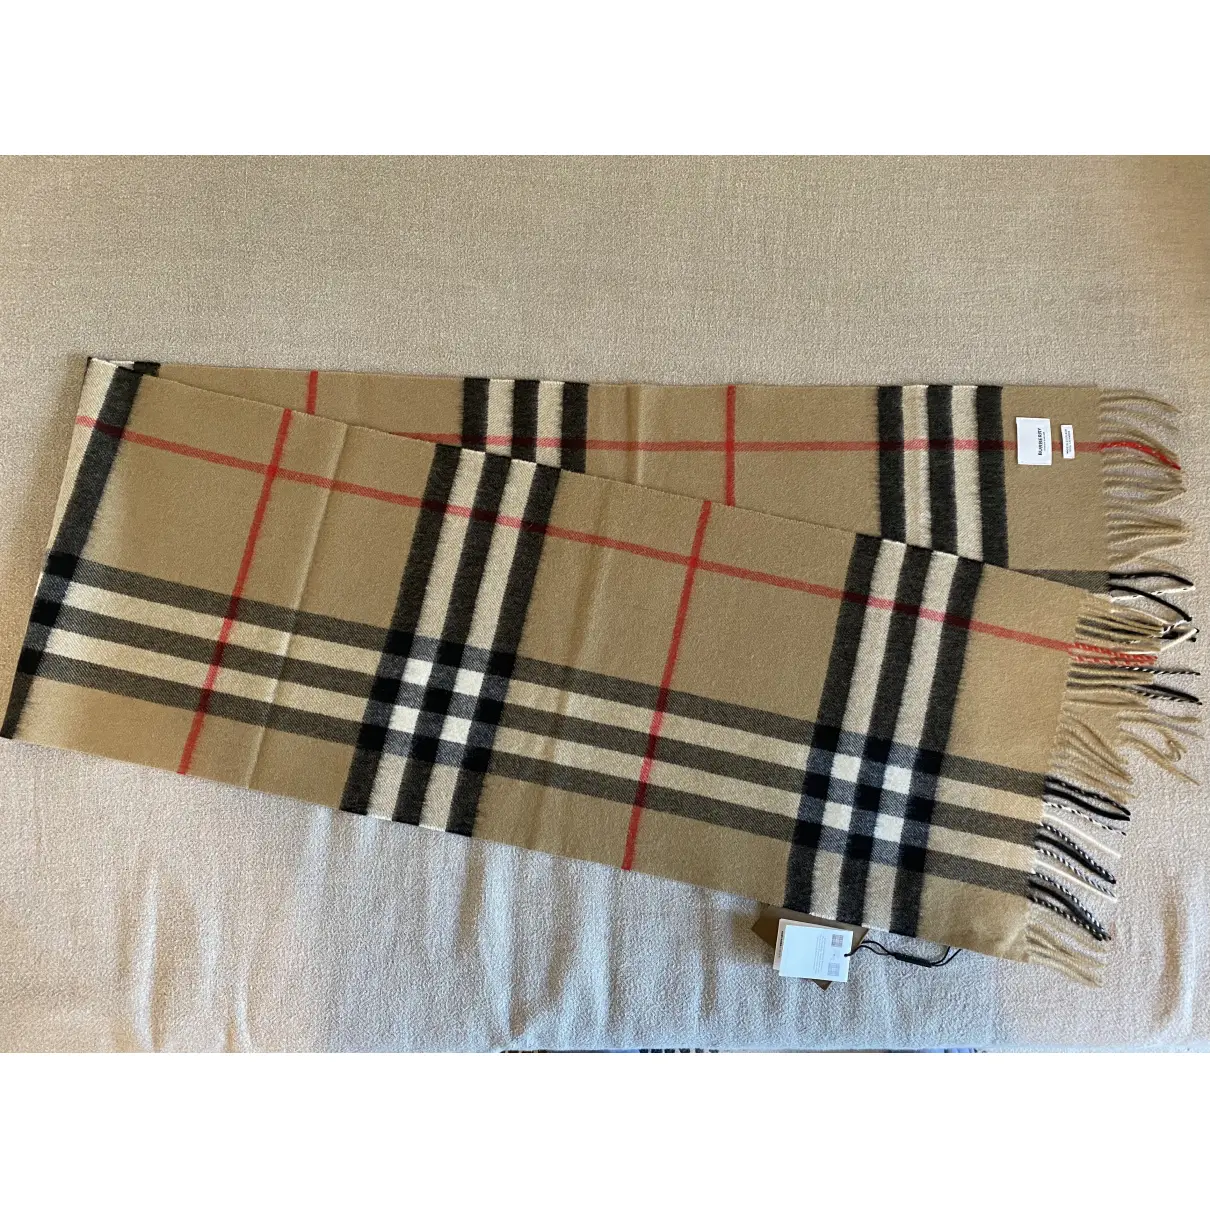 Buy Burberry Cashmere scarf online